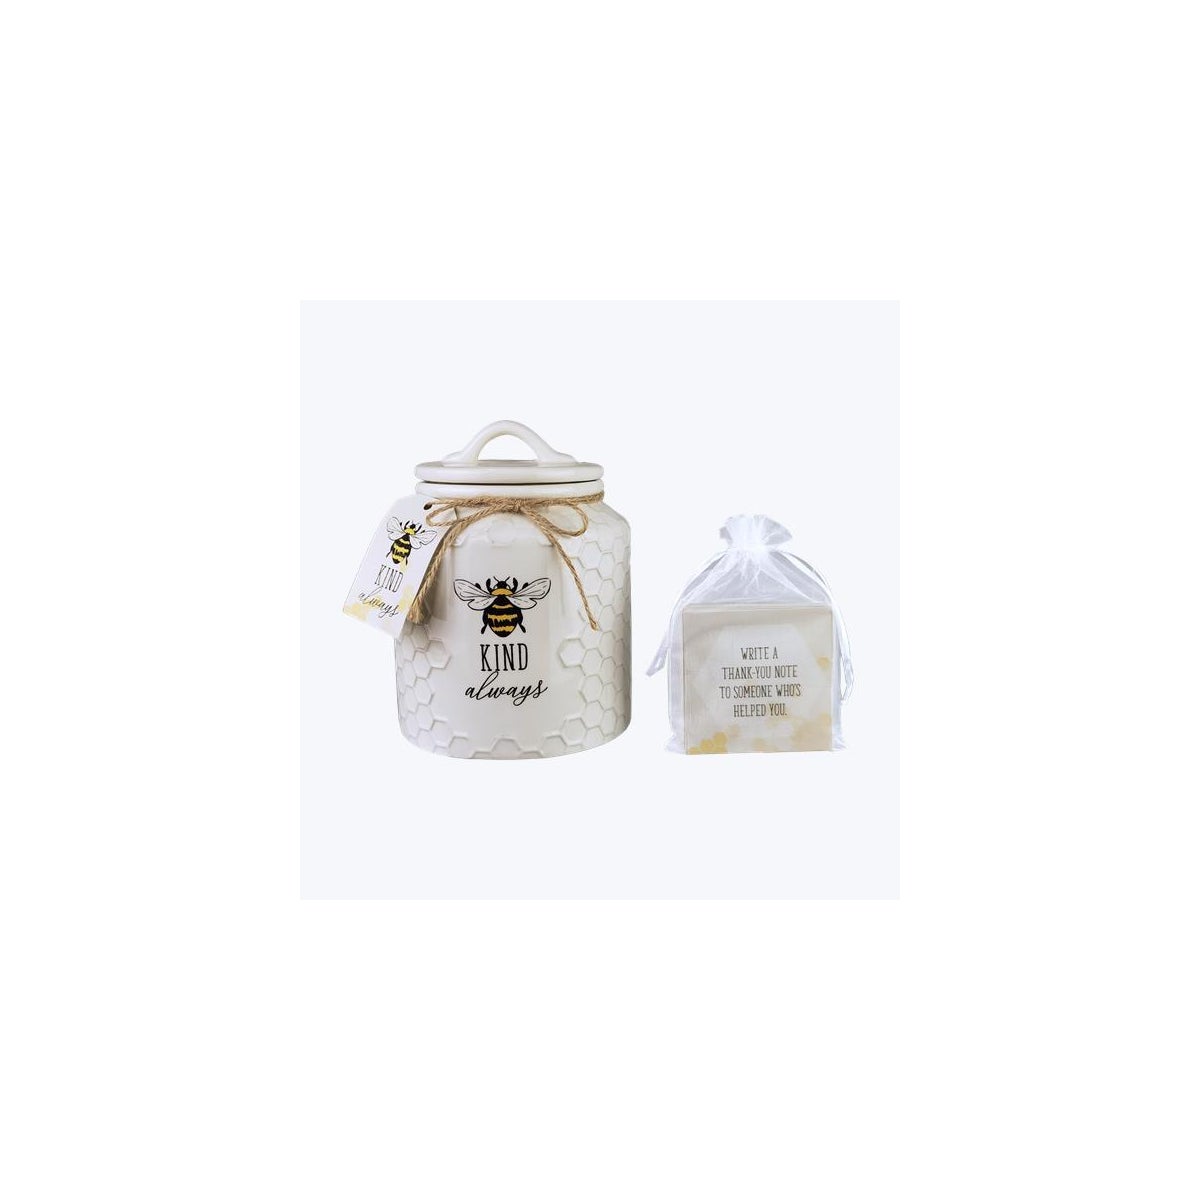 Bee Kind Always Ceramic kindness Jar, with 40 Cards in Organza Bag